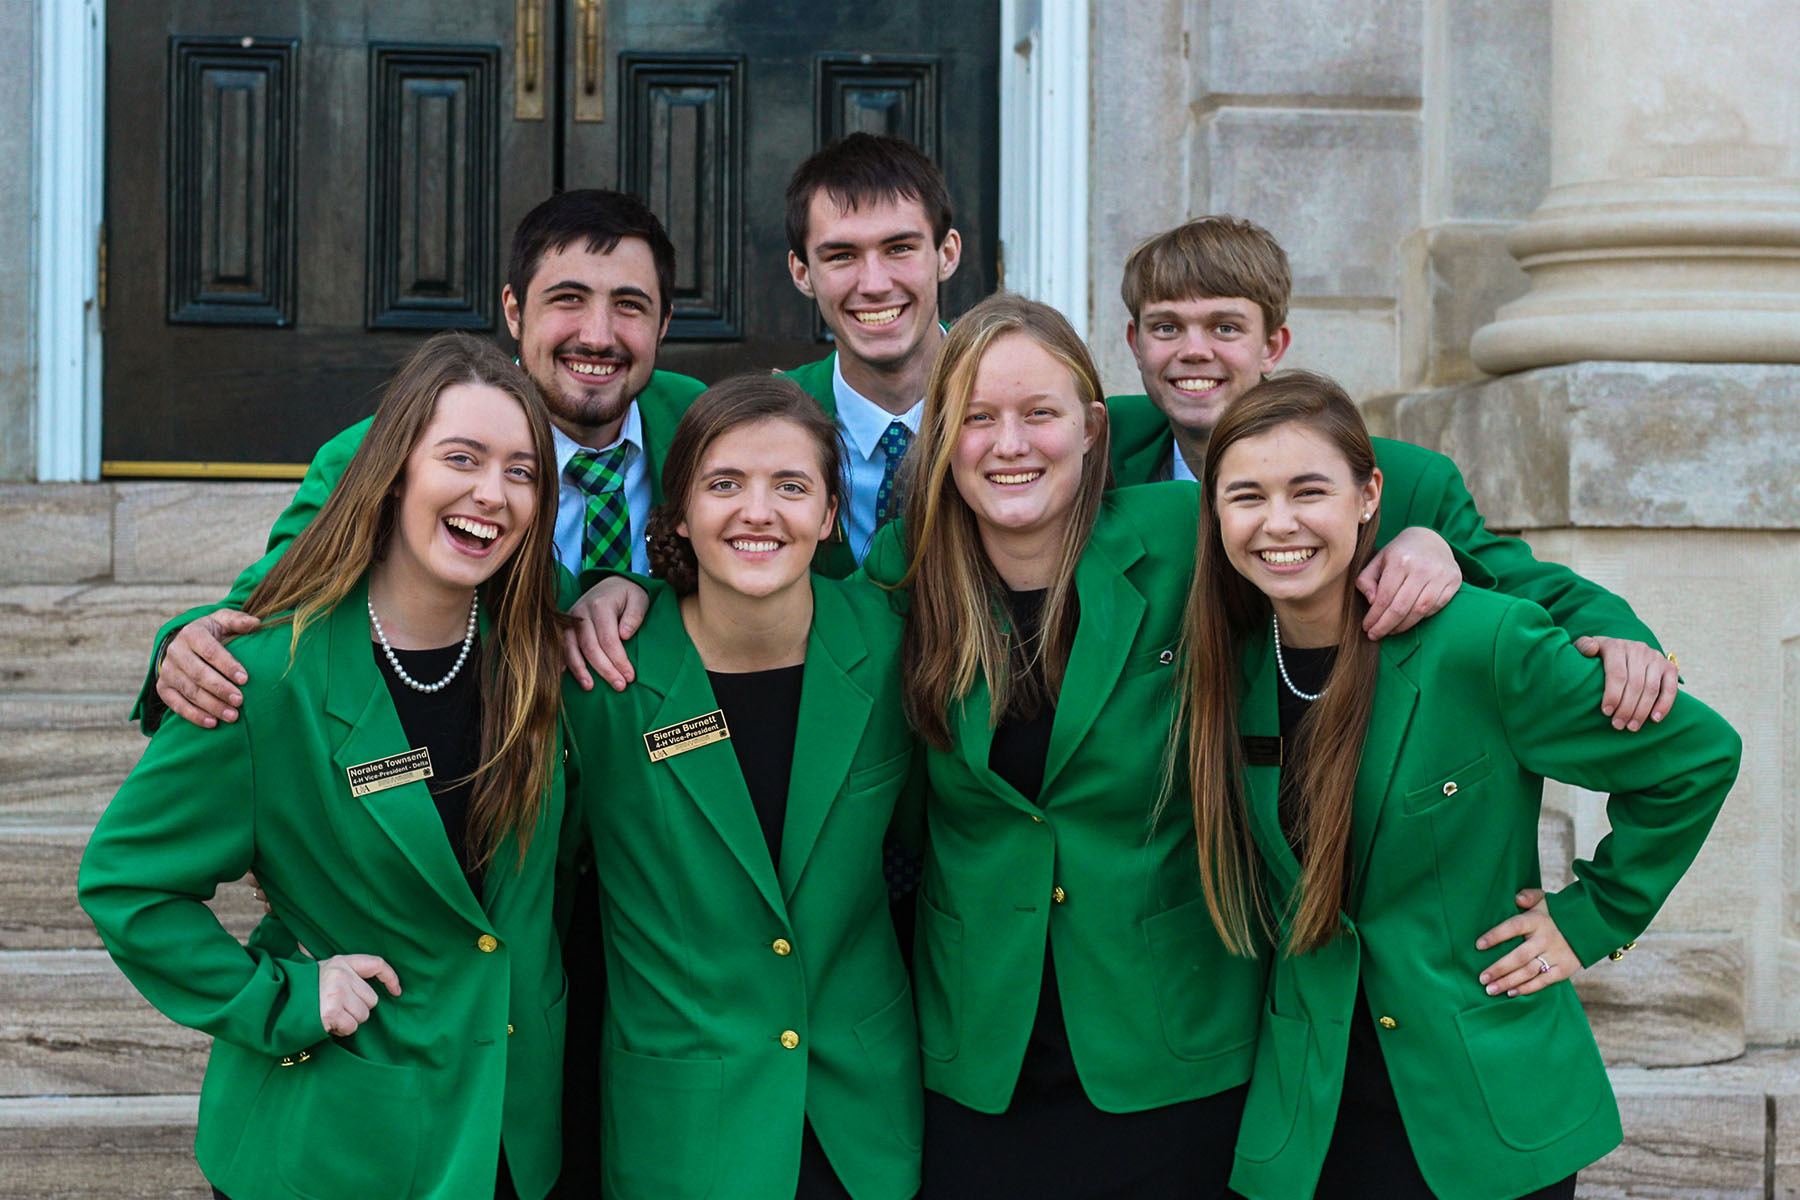 7 state officers, 4 girls in front and 3 boys in back, wearing kelly green blazers.